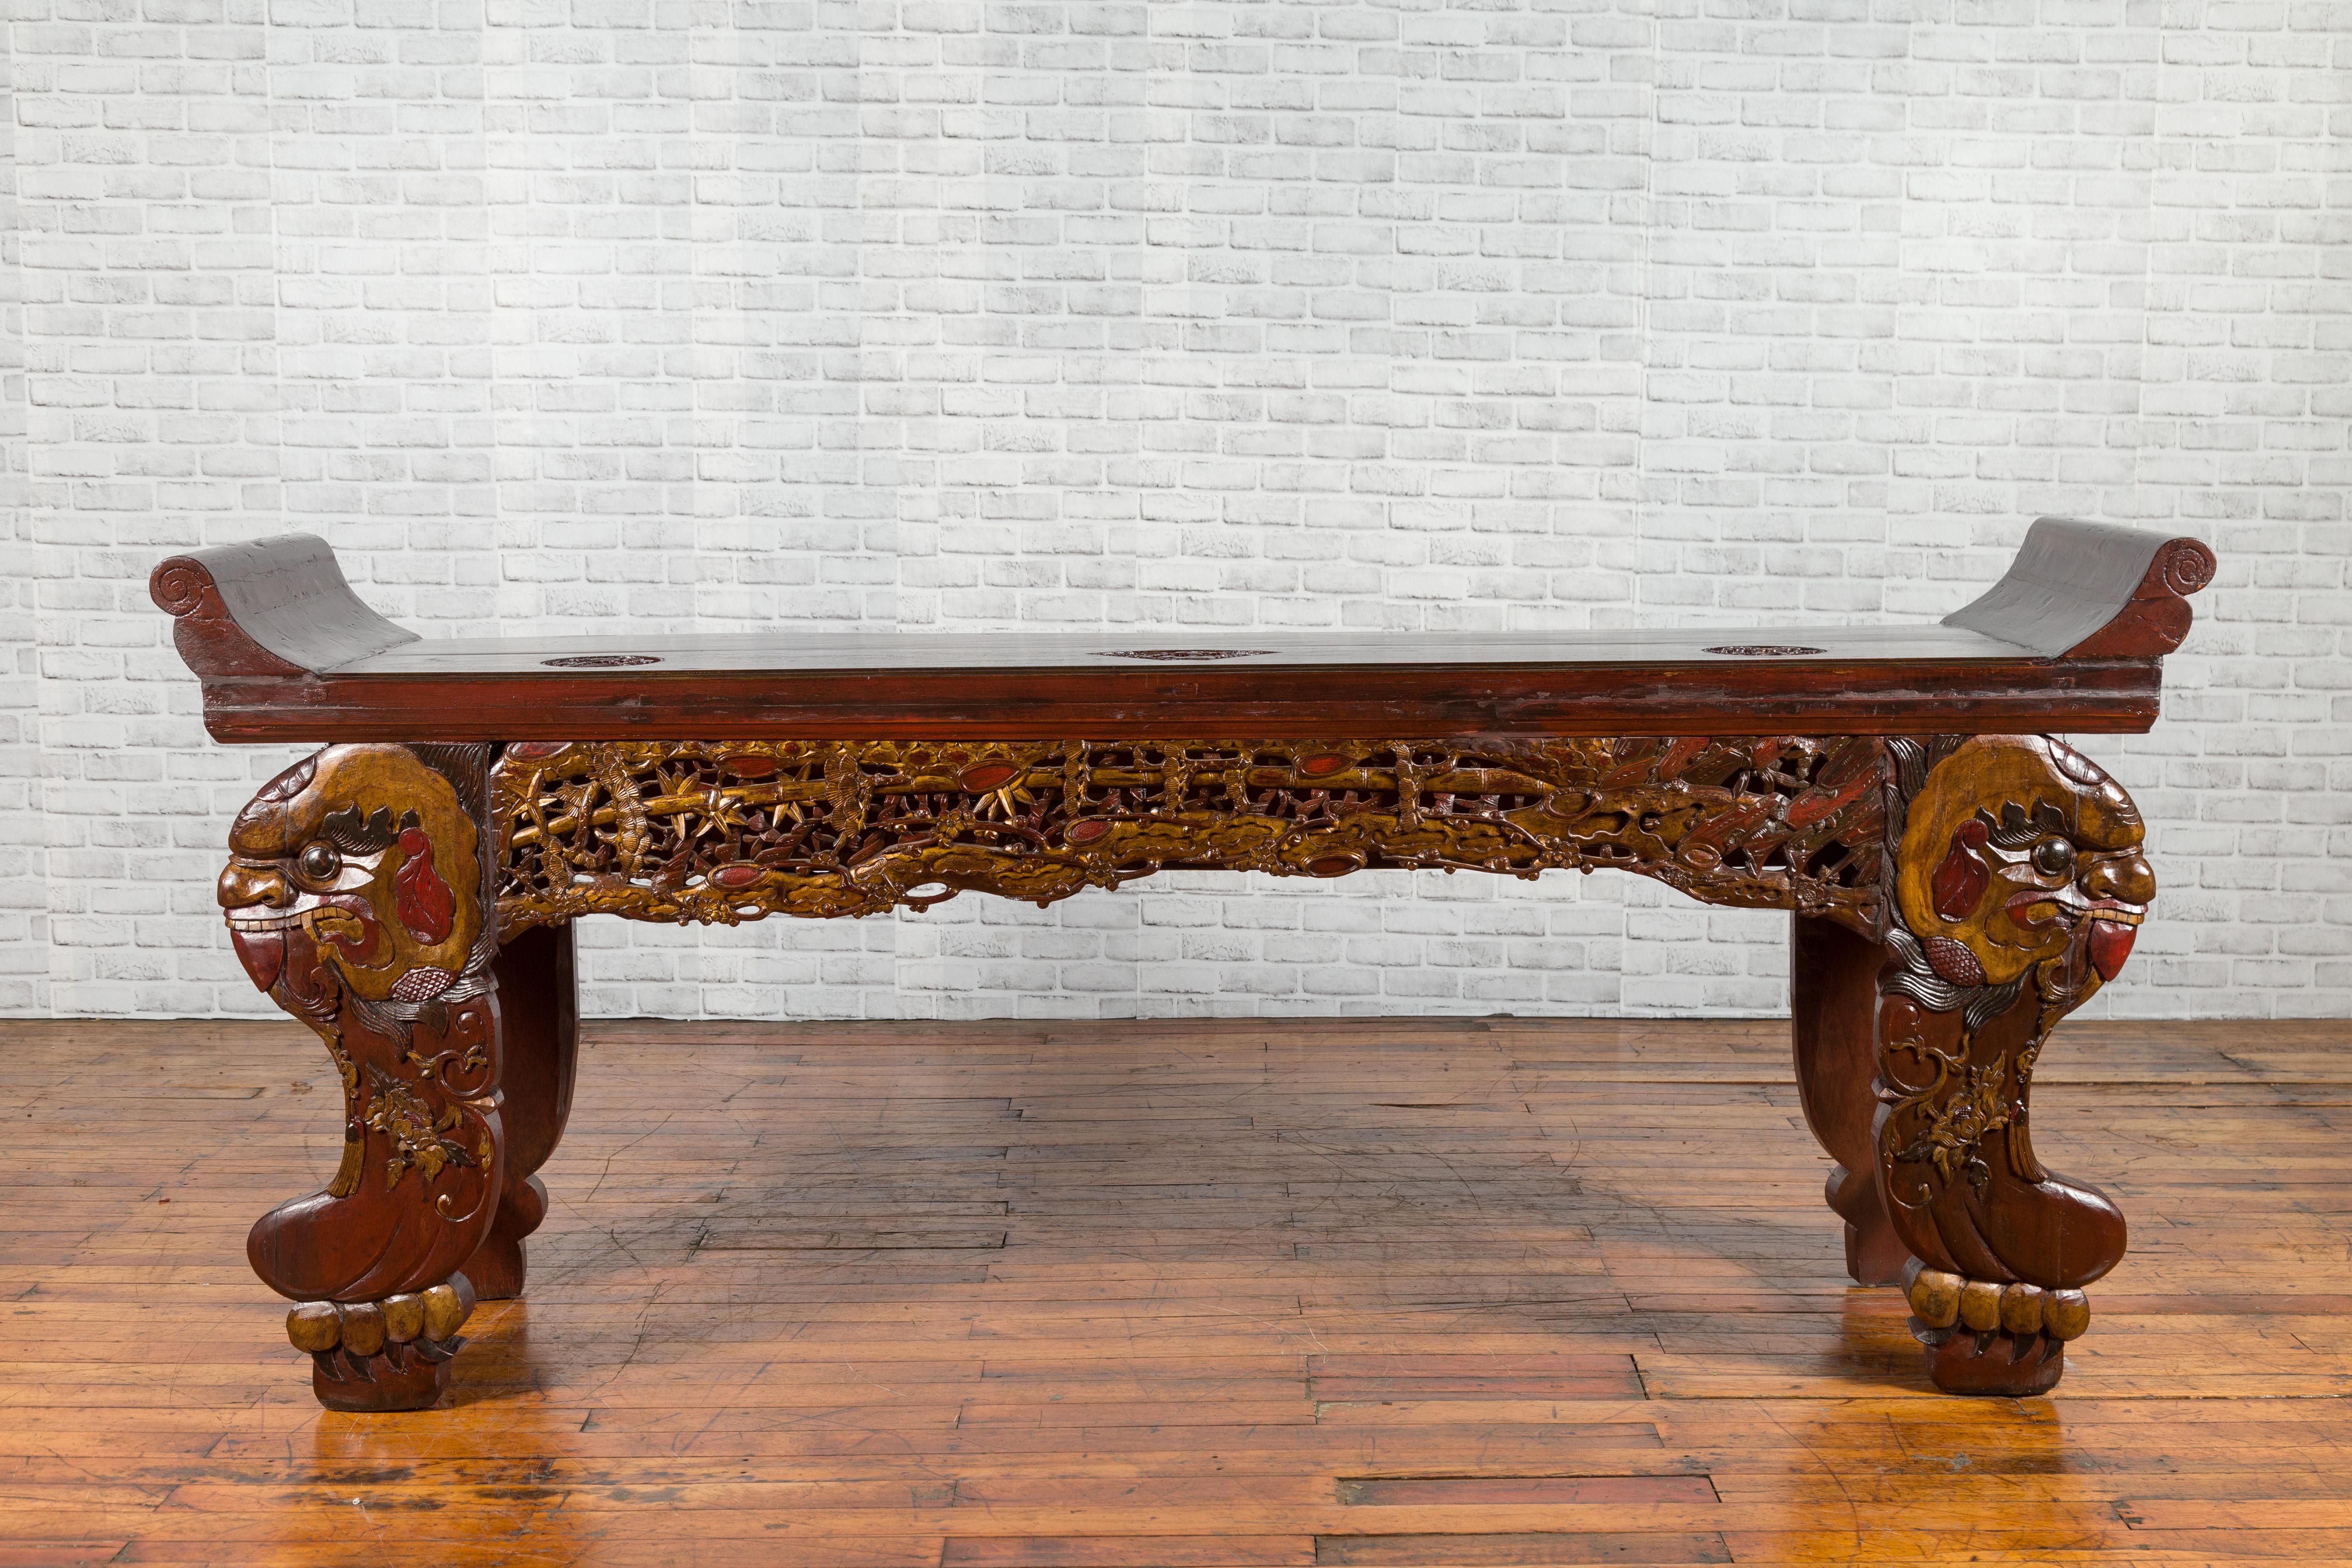 A Chinese antique Qing Dynasty carved altar console table from the 19th century, with everted flanges, mythical animals, dark reddish / brown finish and gilt accents. Created in China during the 19th century, this altar console table features a